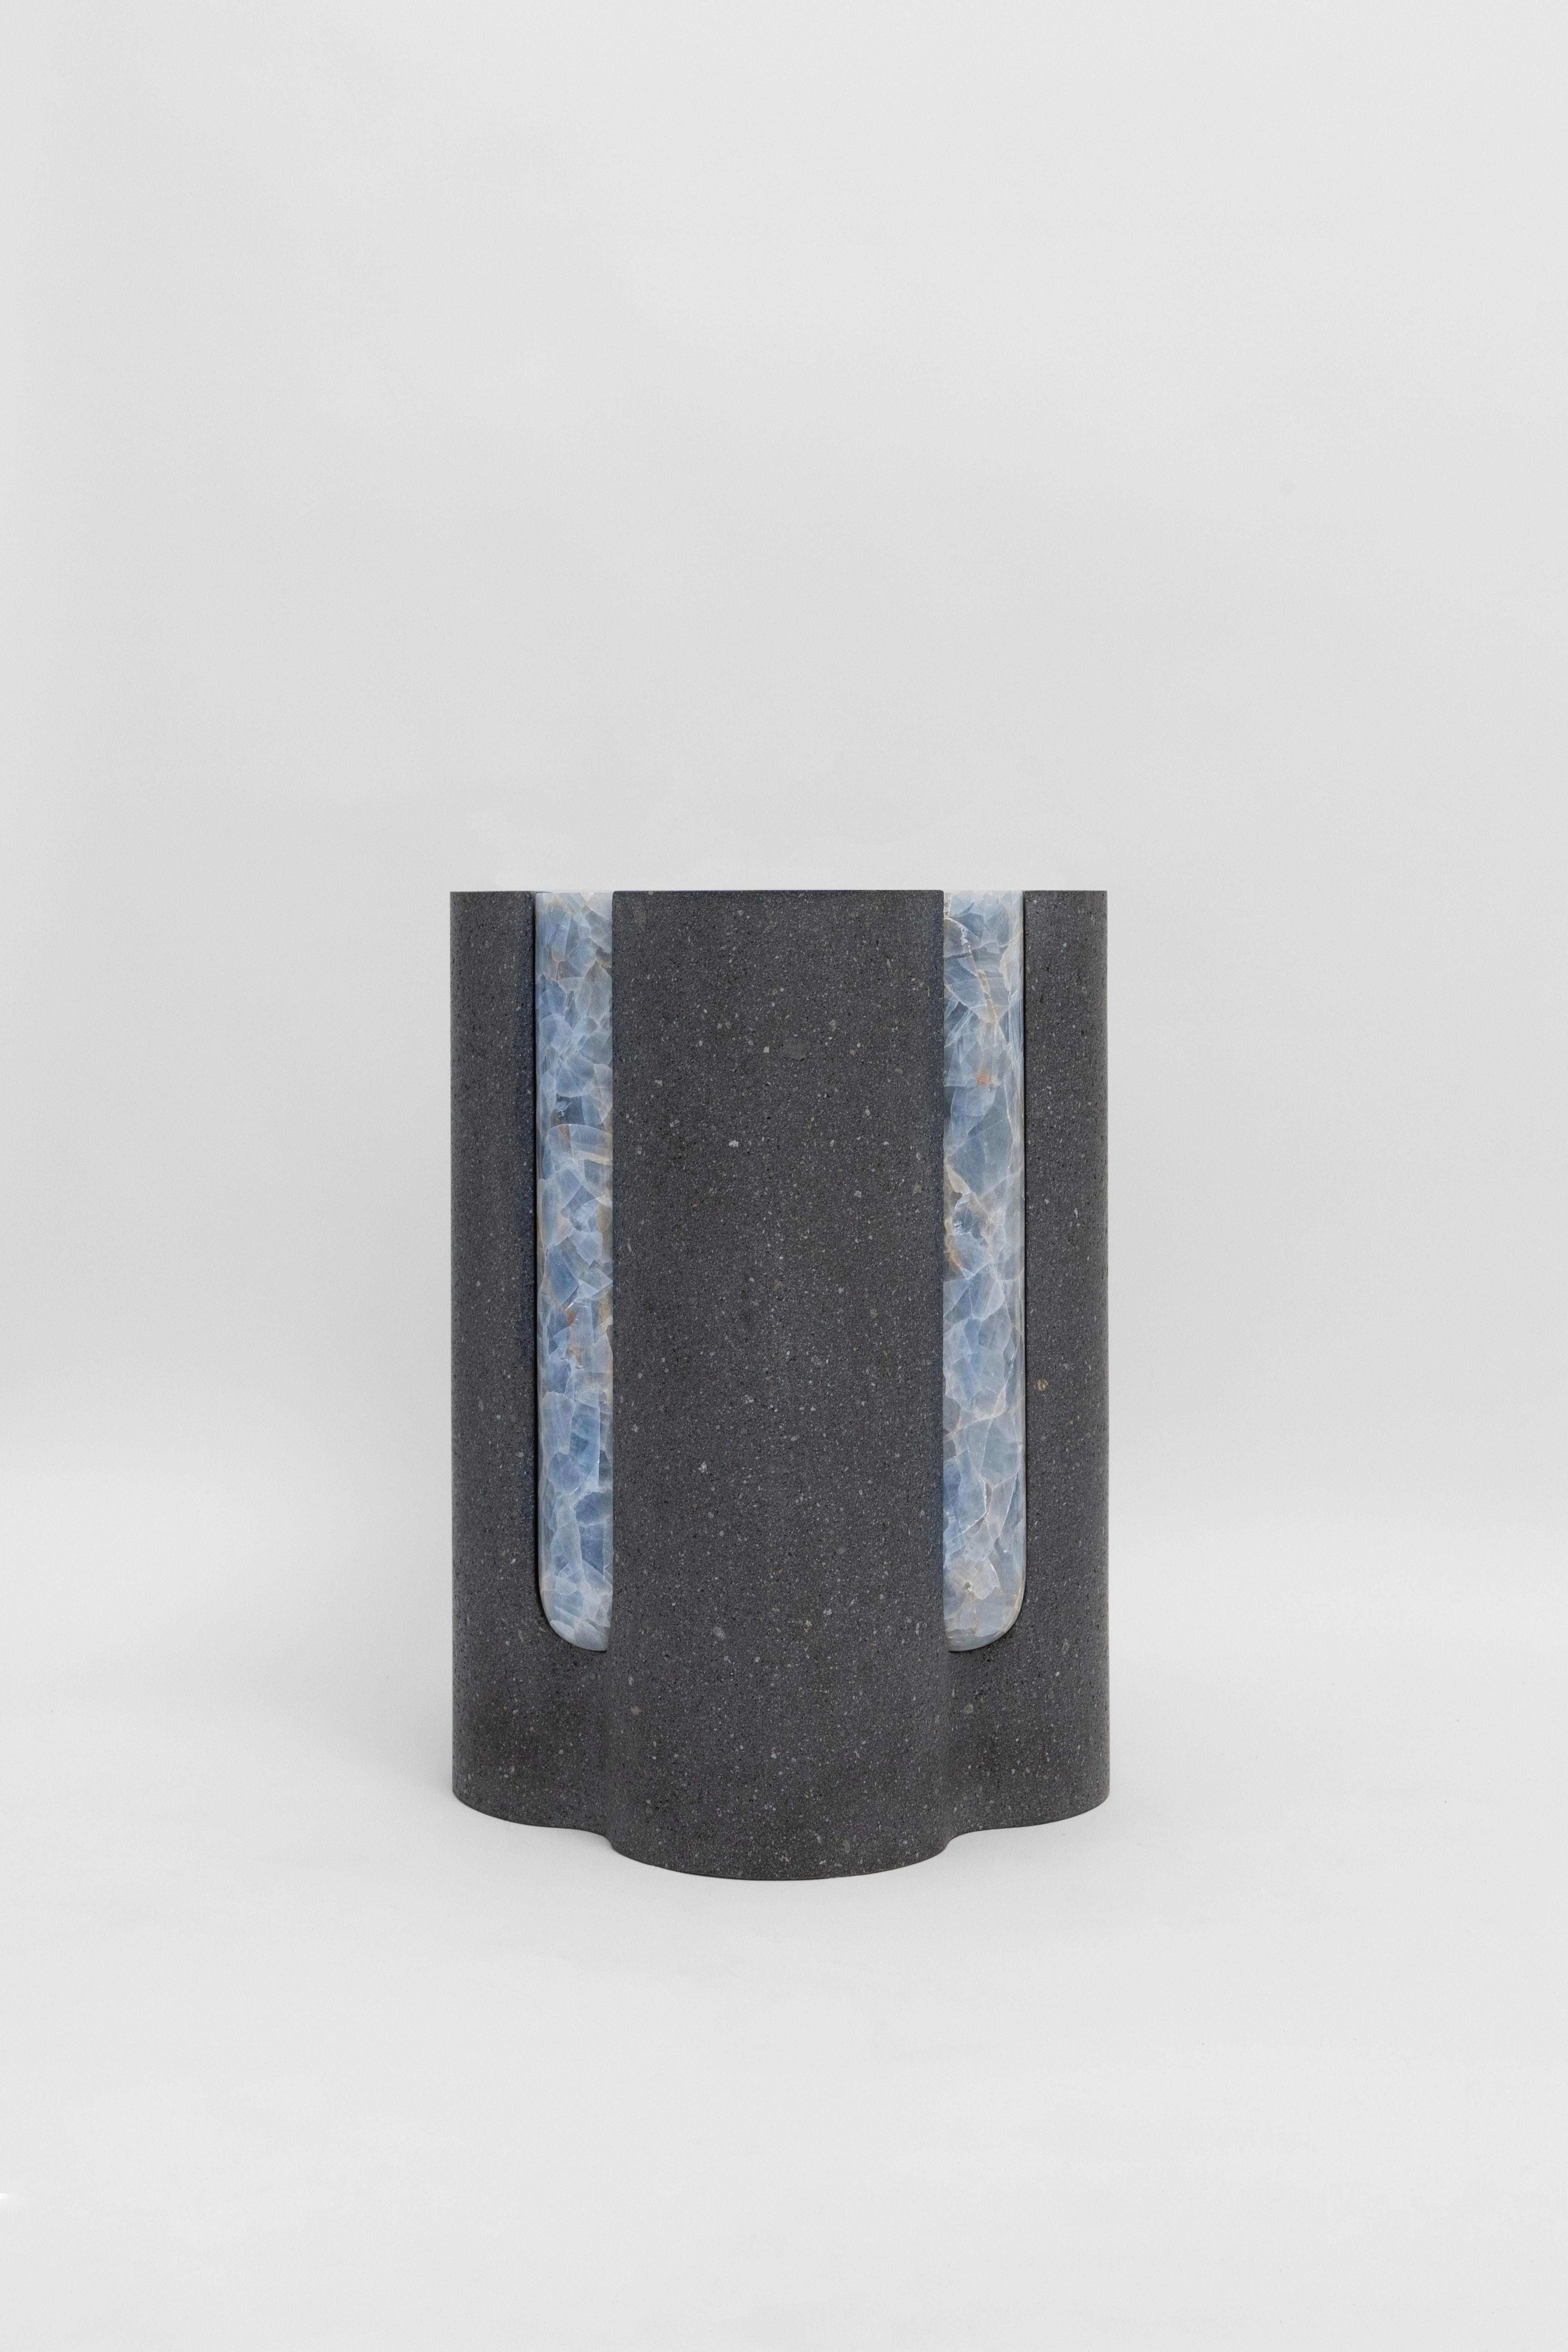 Materials: Lava stone and blue calcite
Indoors and outdoors
Side table / Stool

Through an abstract geometric language where cubes and cylinders playfully alternate, these stools represent the millenary connections existing inside the Earth; they